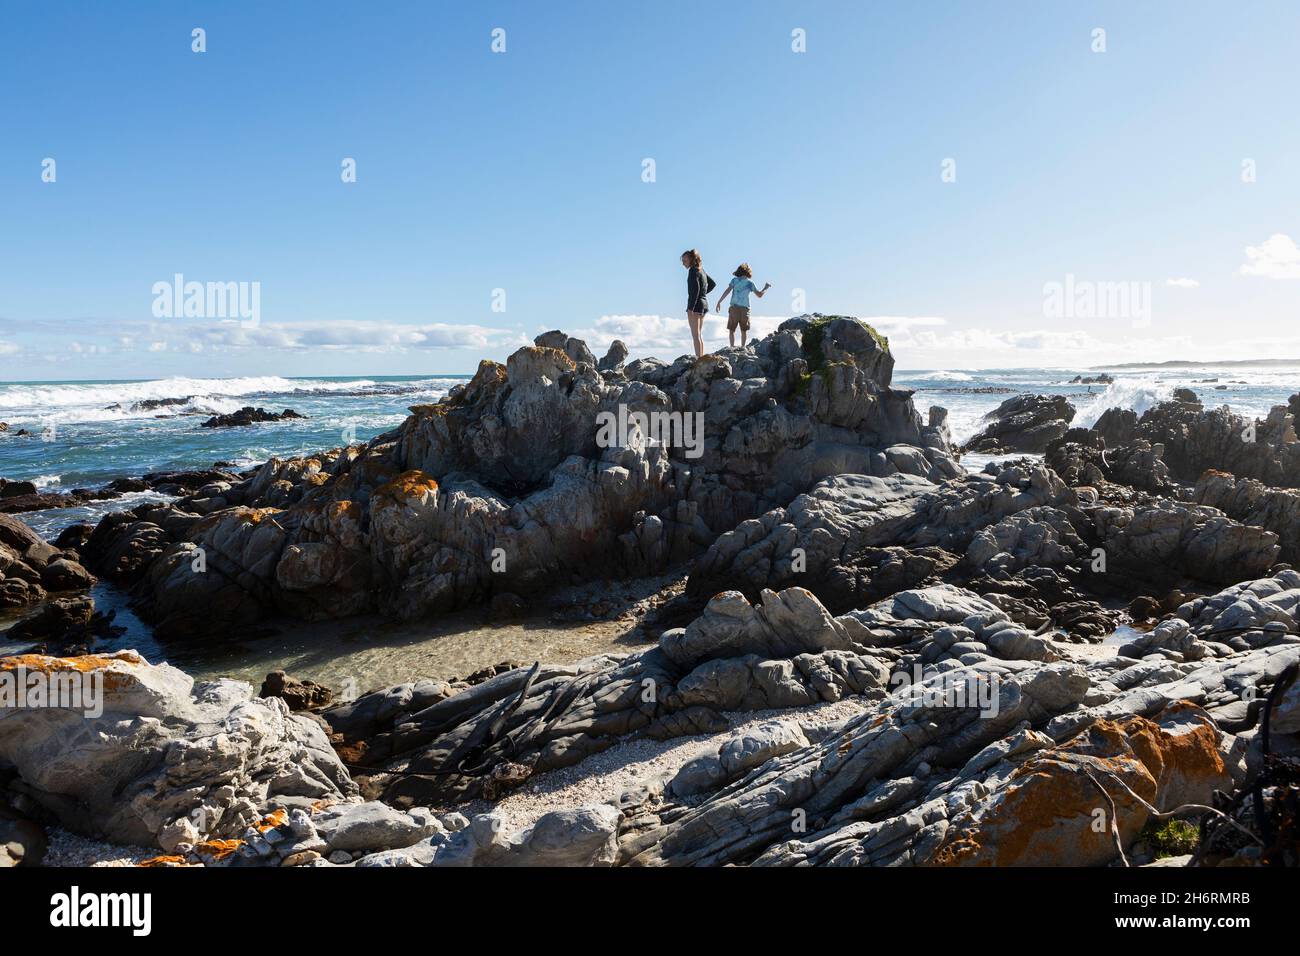 Two children, a teenage girl and eight year old boy exploring the jagged rocks and rockpools on a beach. Stock Photo